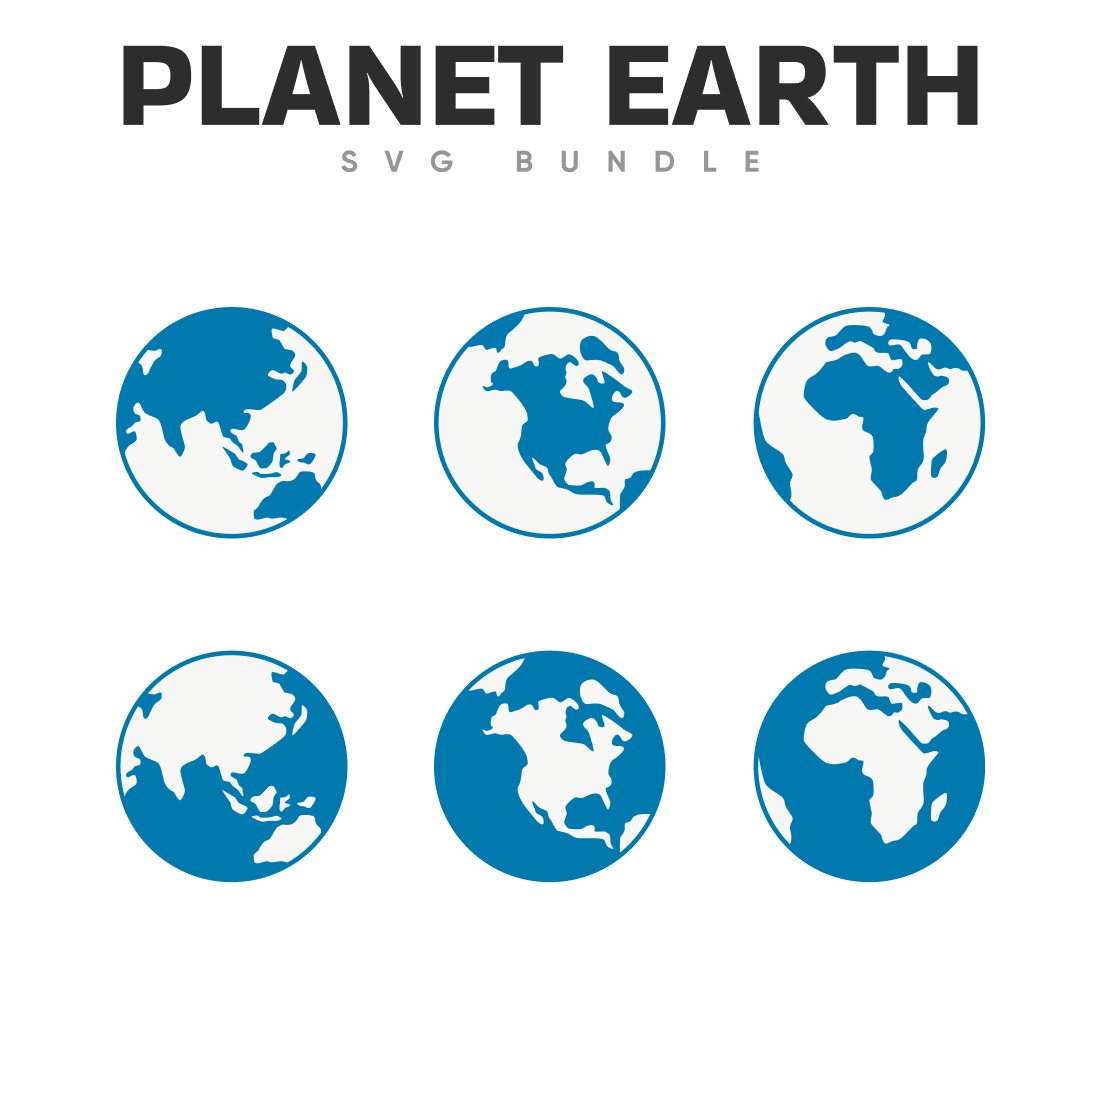 Prints of planet earth.